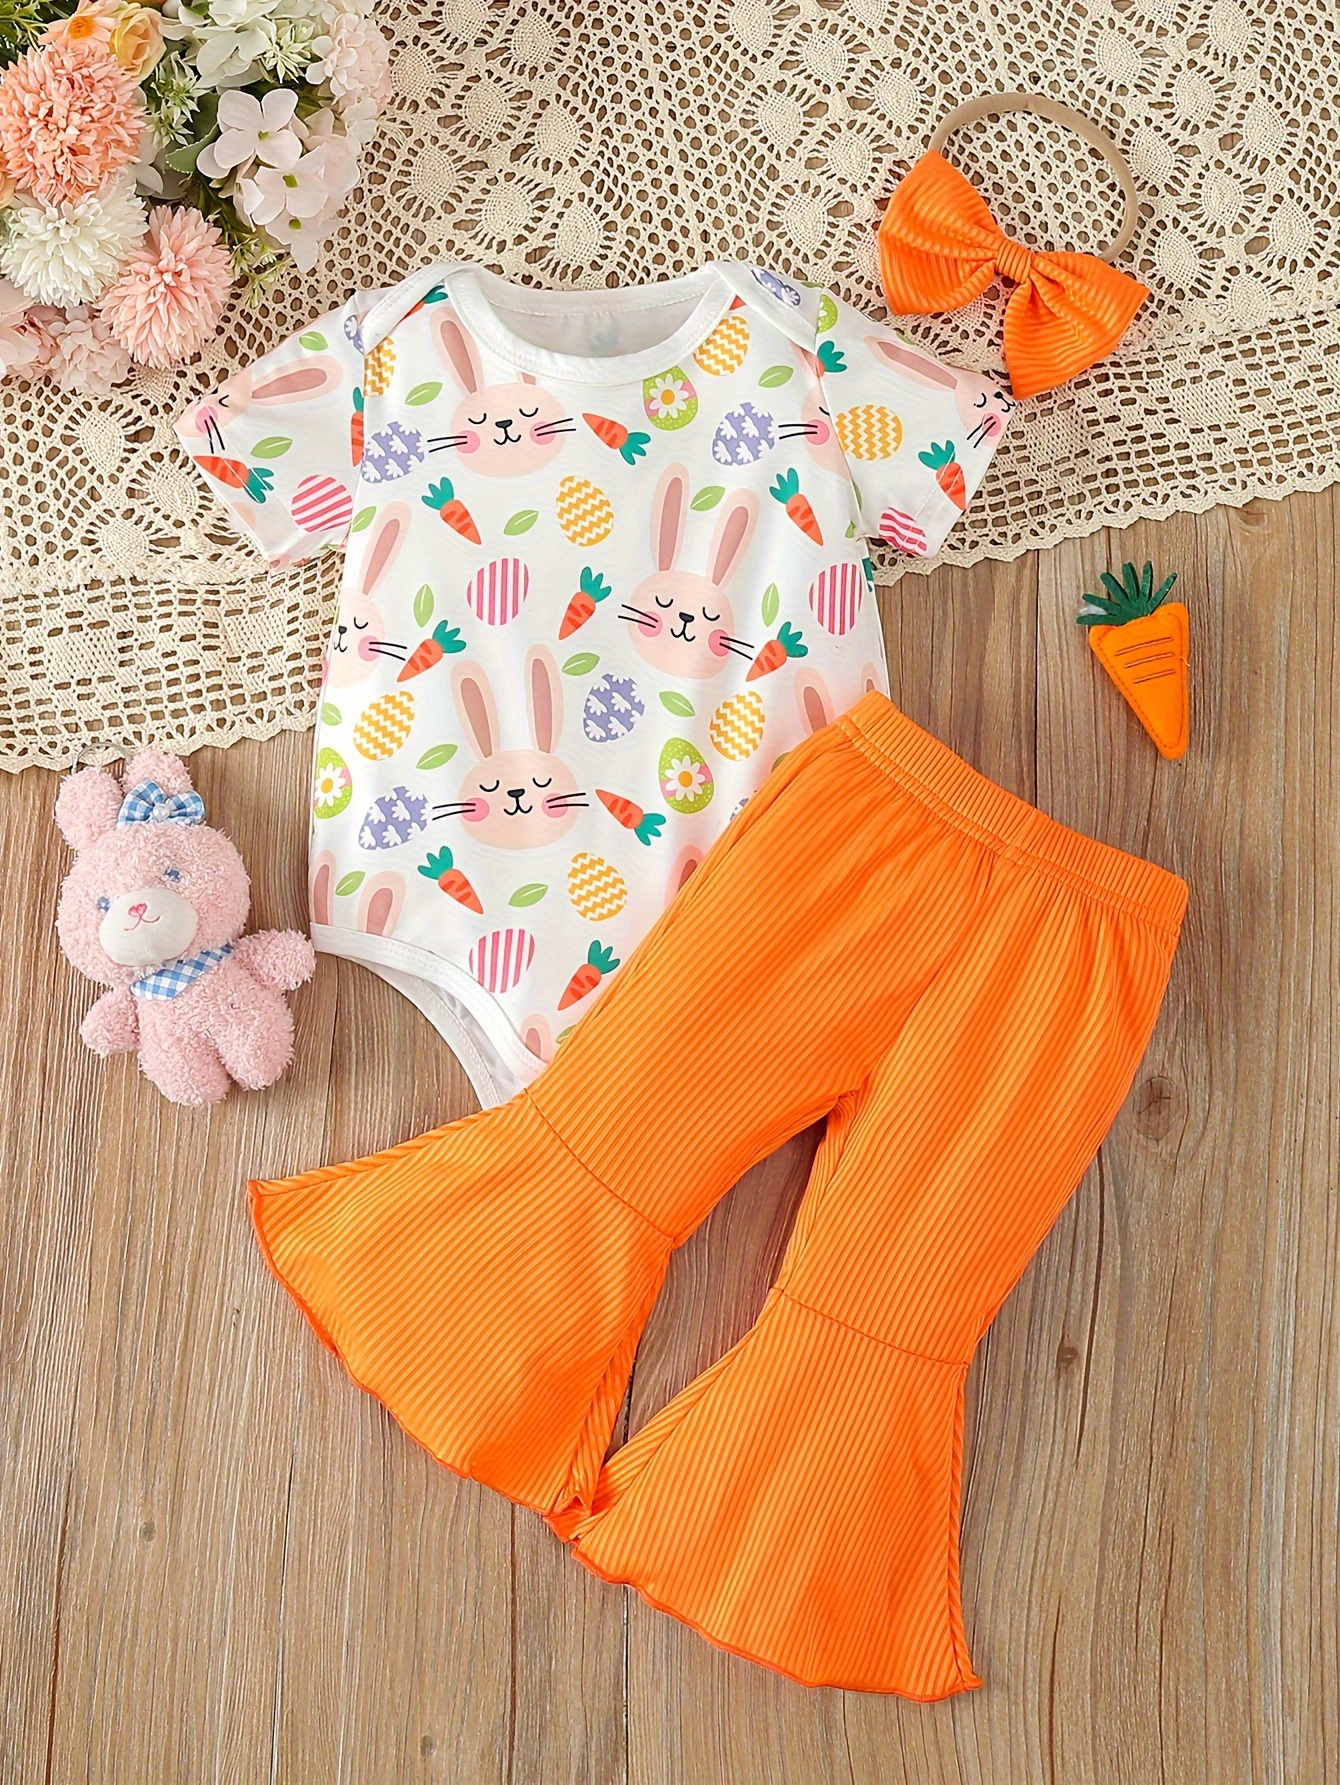 Toddler Baby Girls Easter Clothes Short Sleeve Bunny Print * Hem Top +  Flare Pants Set Kids Clothes